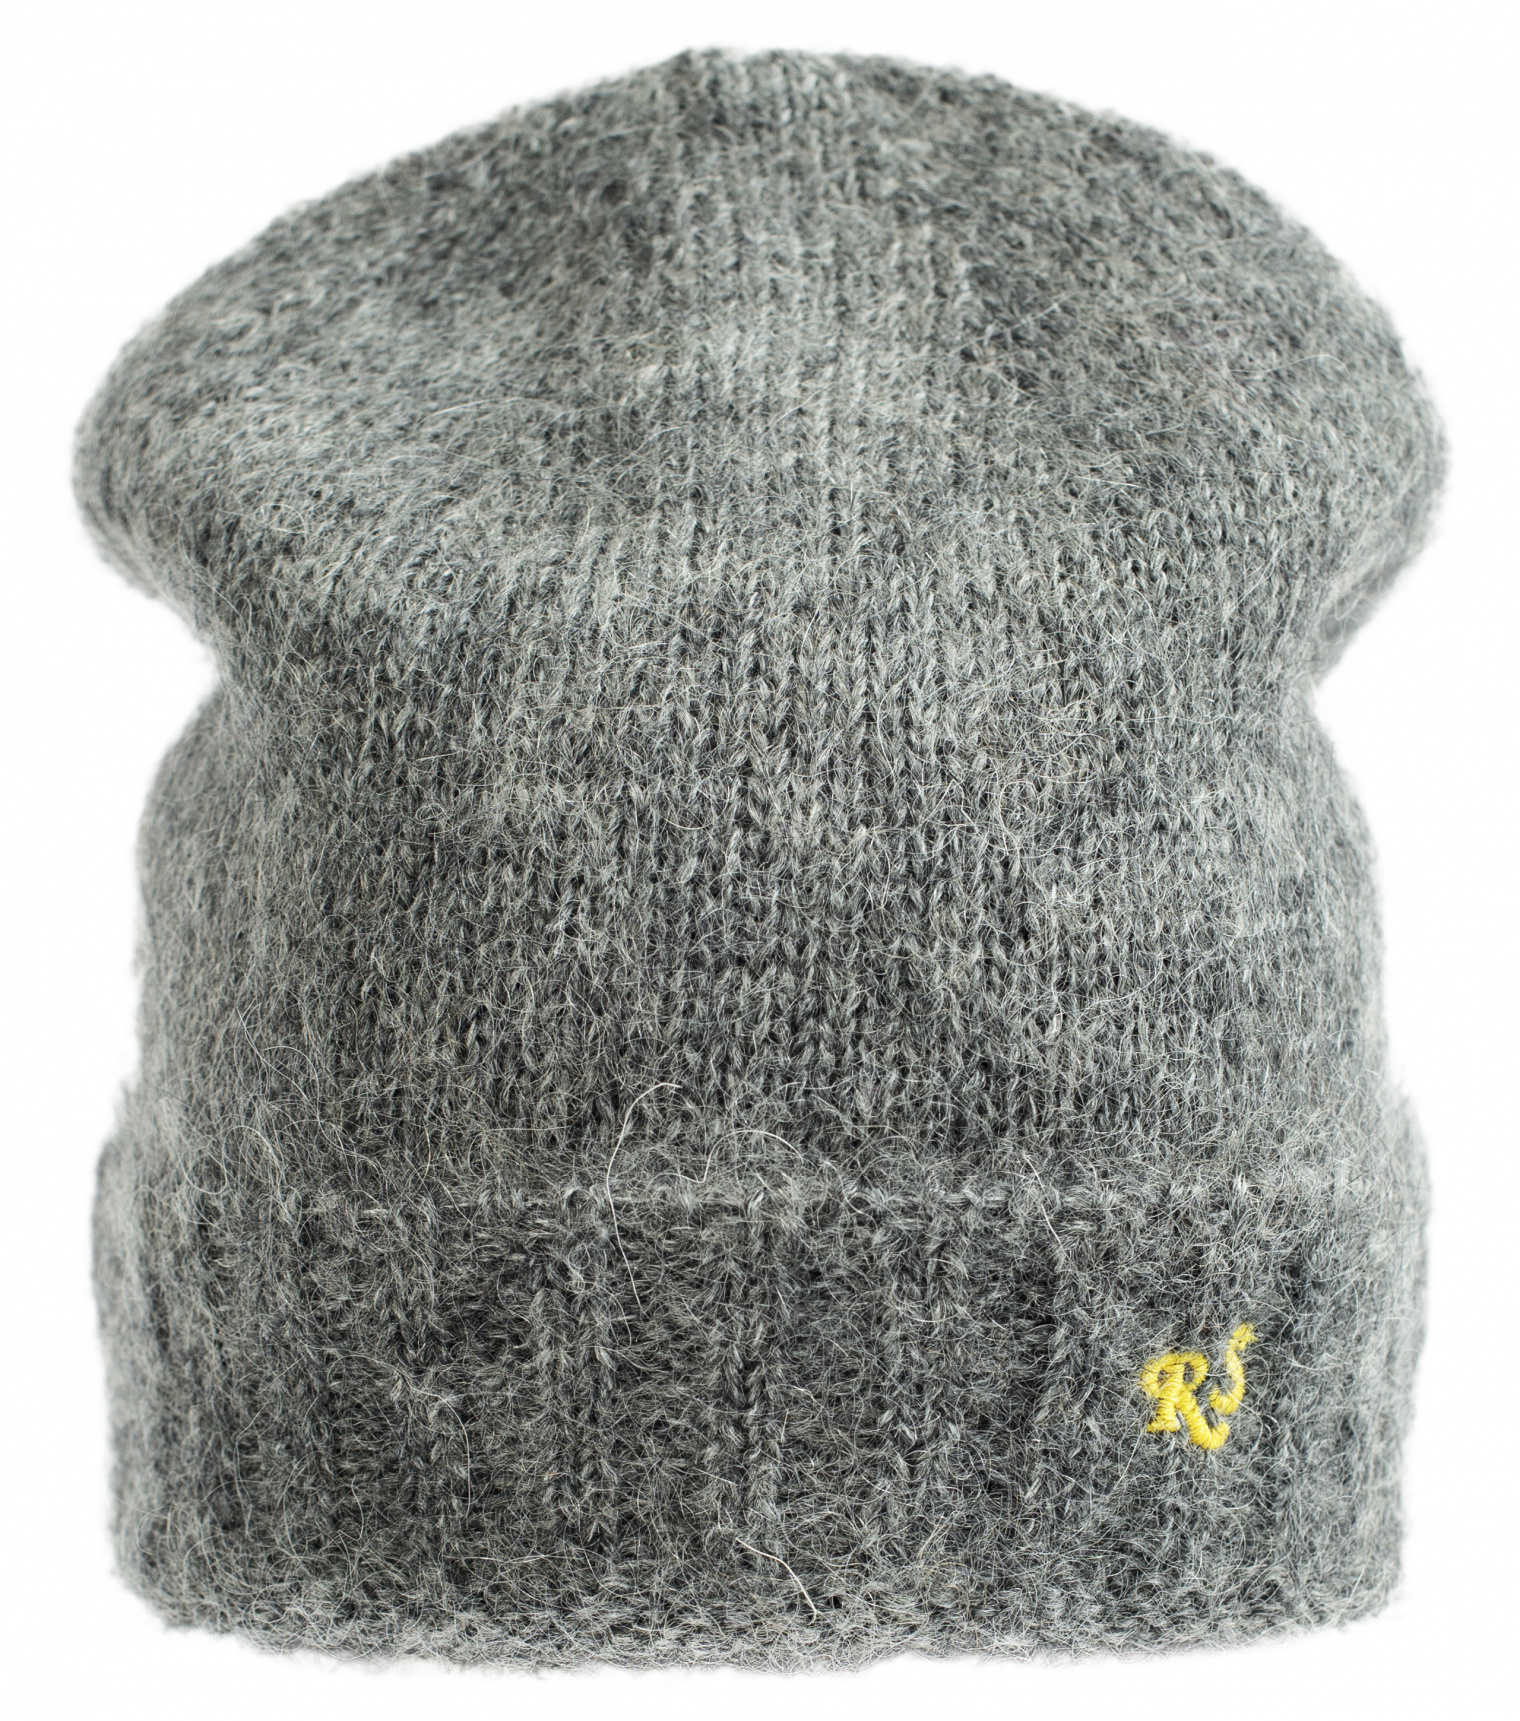 Raf Simons RS Knitted Beanie in grey